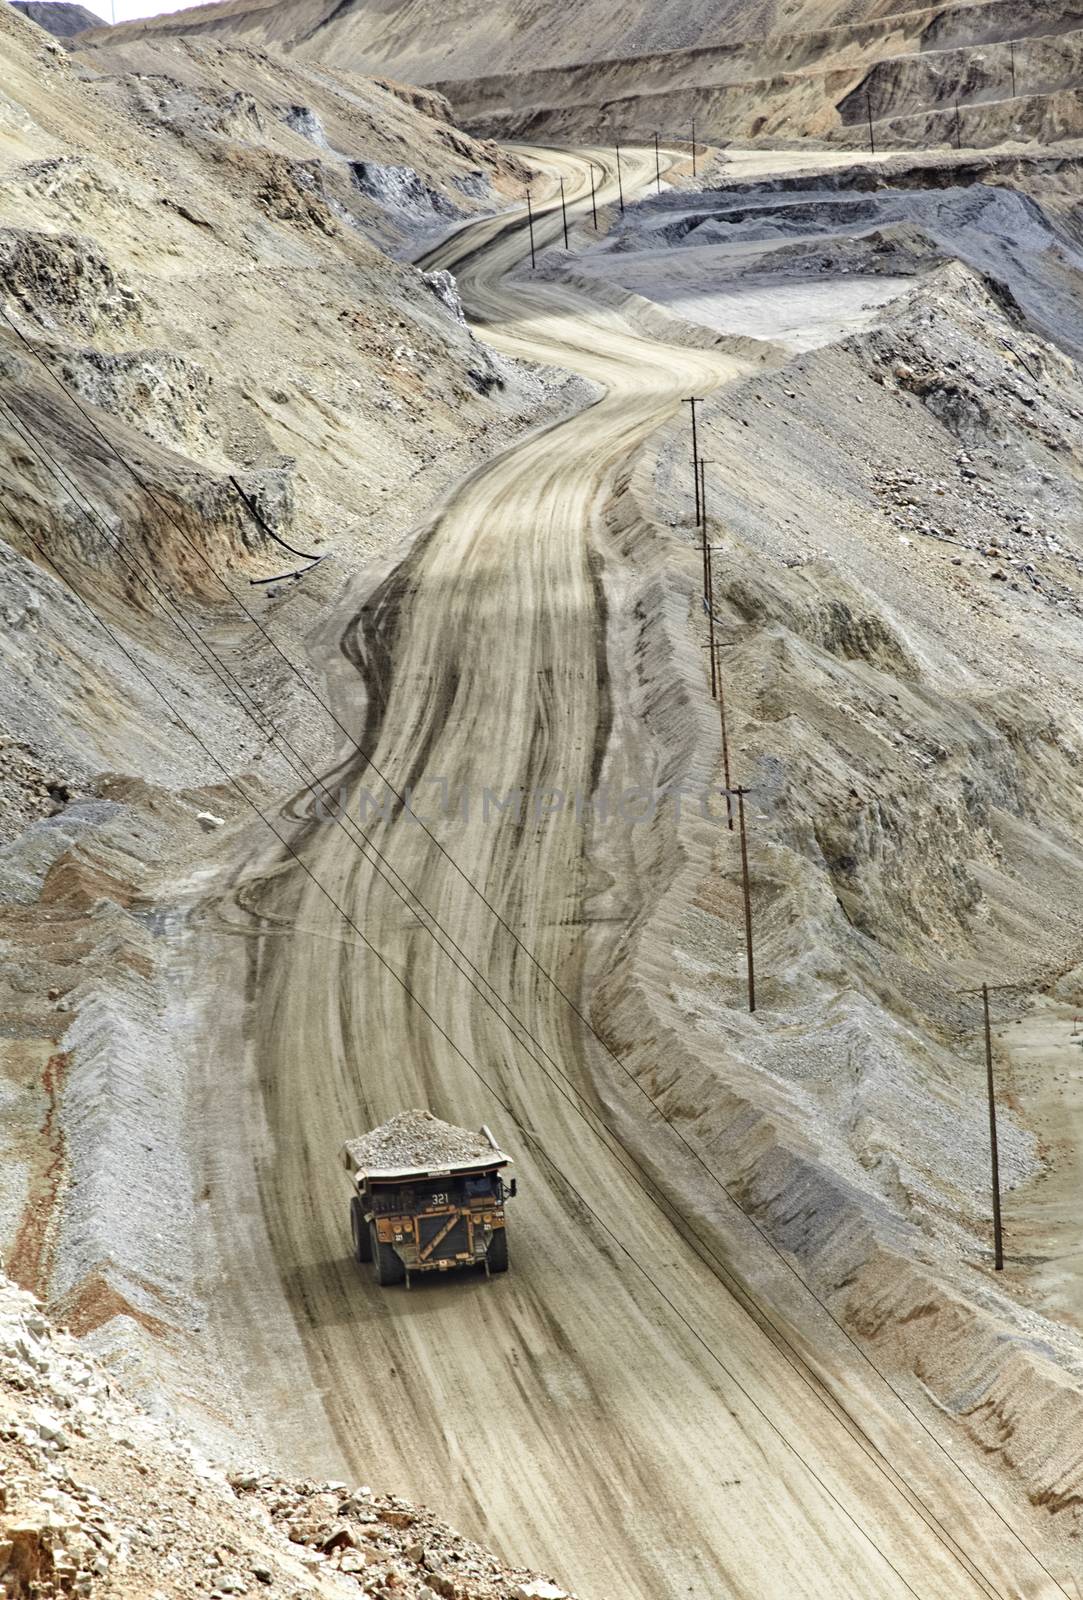 Excavation open pit mine Kennecott, copper, gold and silver mine by Tjeerdkruse